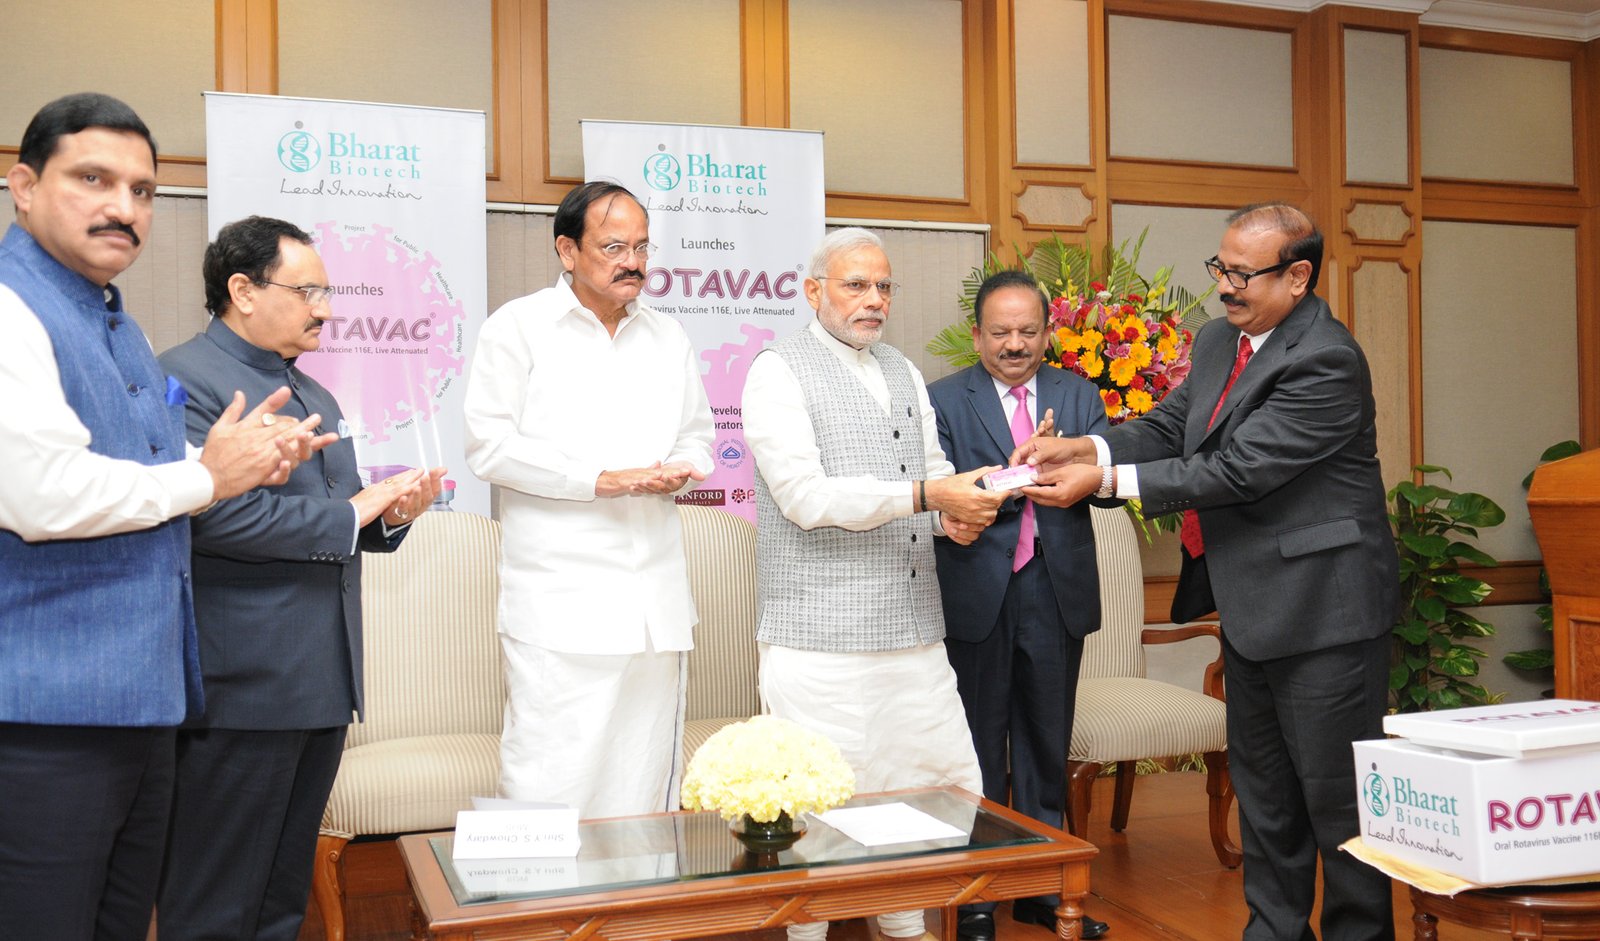 The prime minister, Narendra Modi launching the first indigenously developed and manufactured vaccine against Rotavirus, in New Delhi on March 09, 2015